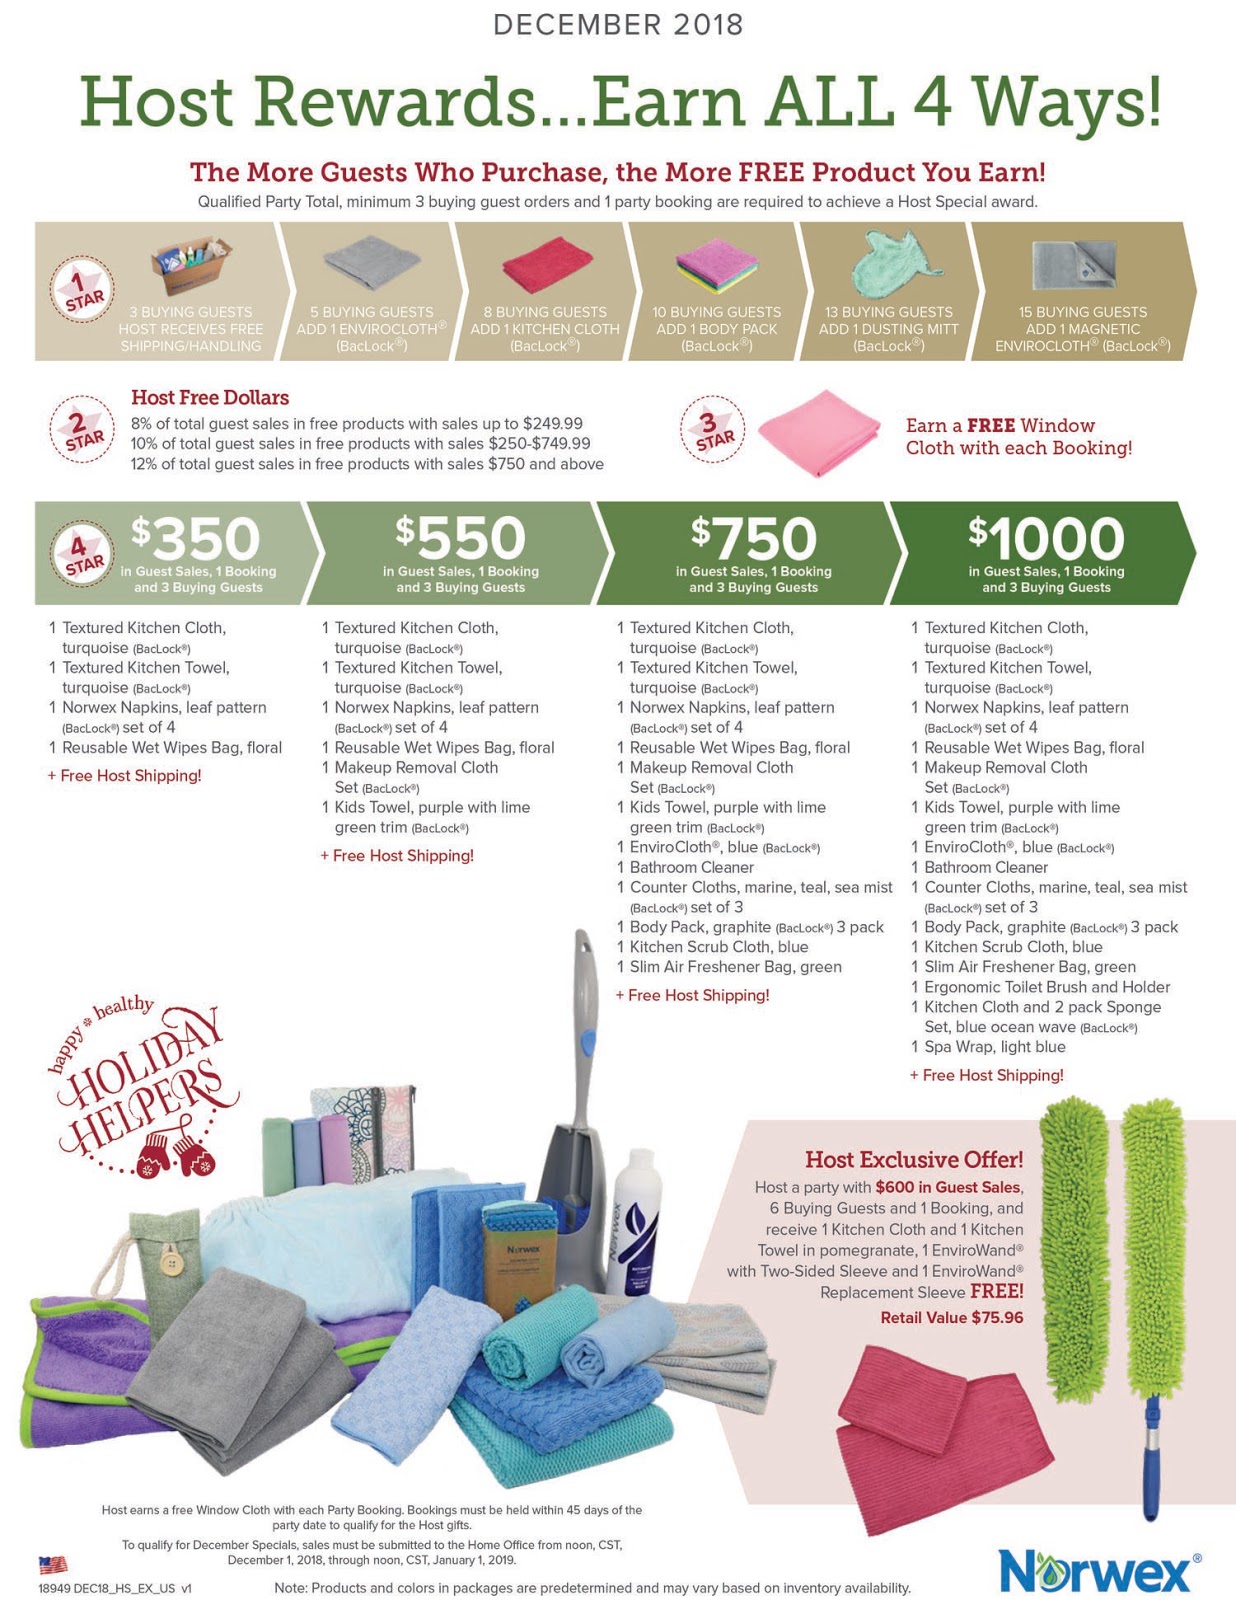 Rebecca Lange - Norwex Independent Sales Consultant: Norwex Hand and Bath  Towels